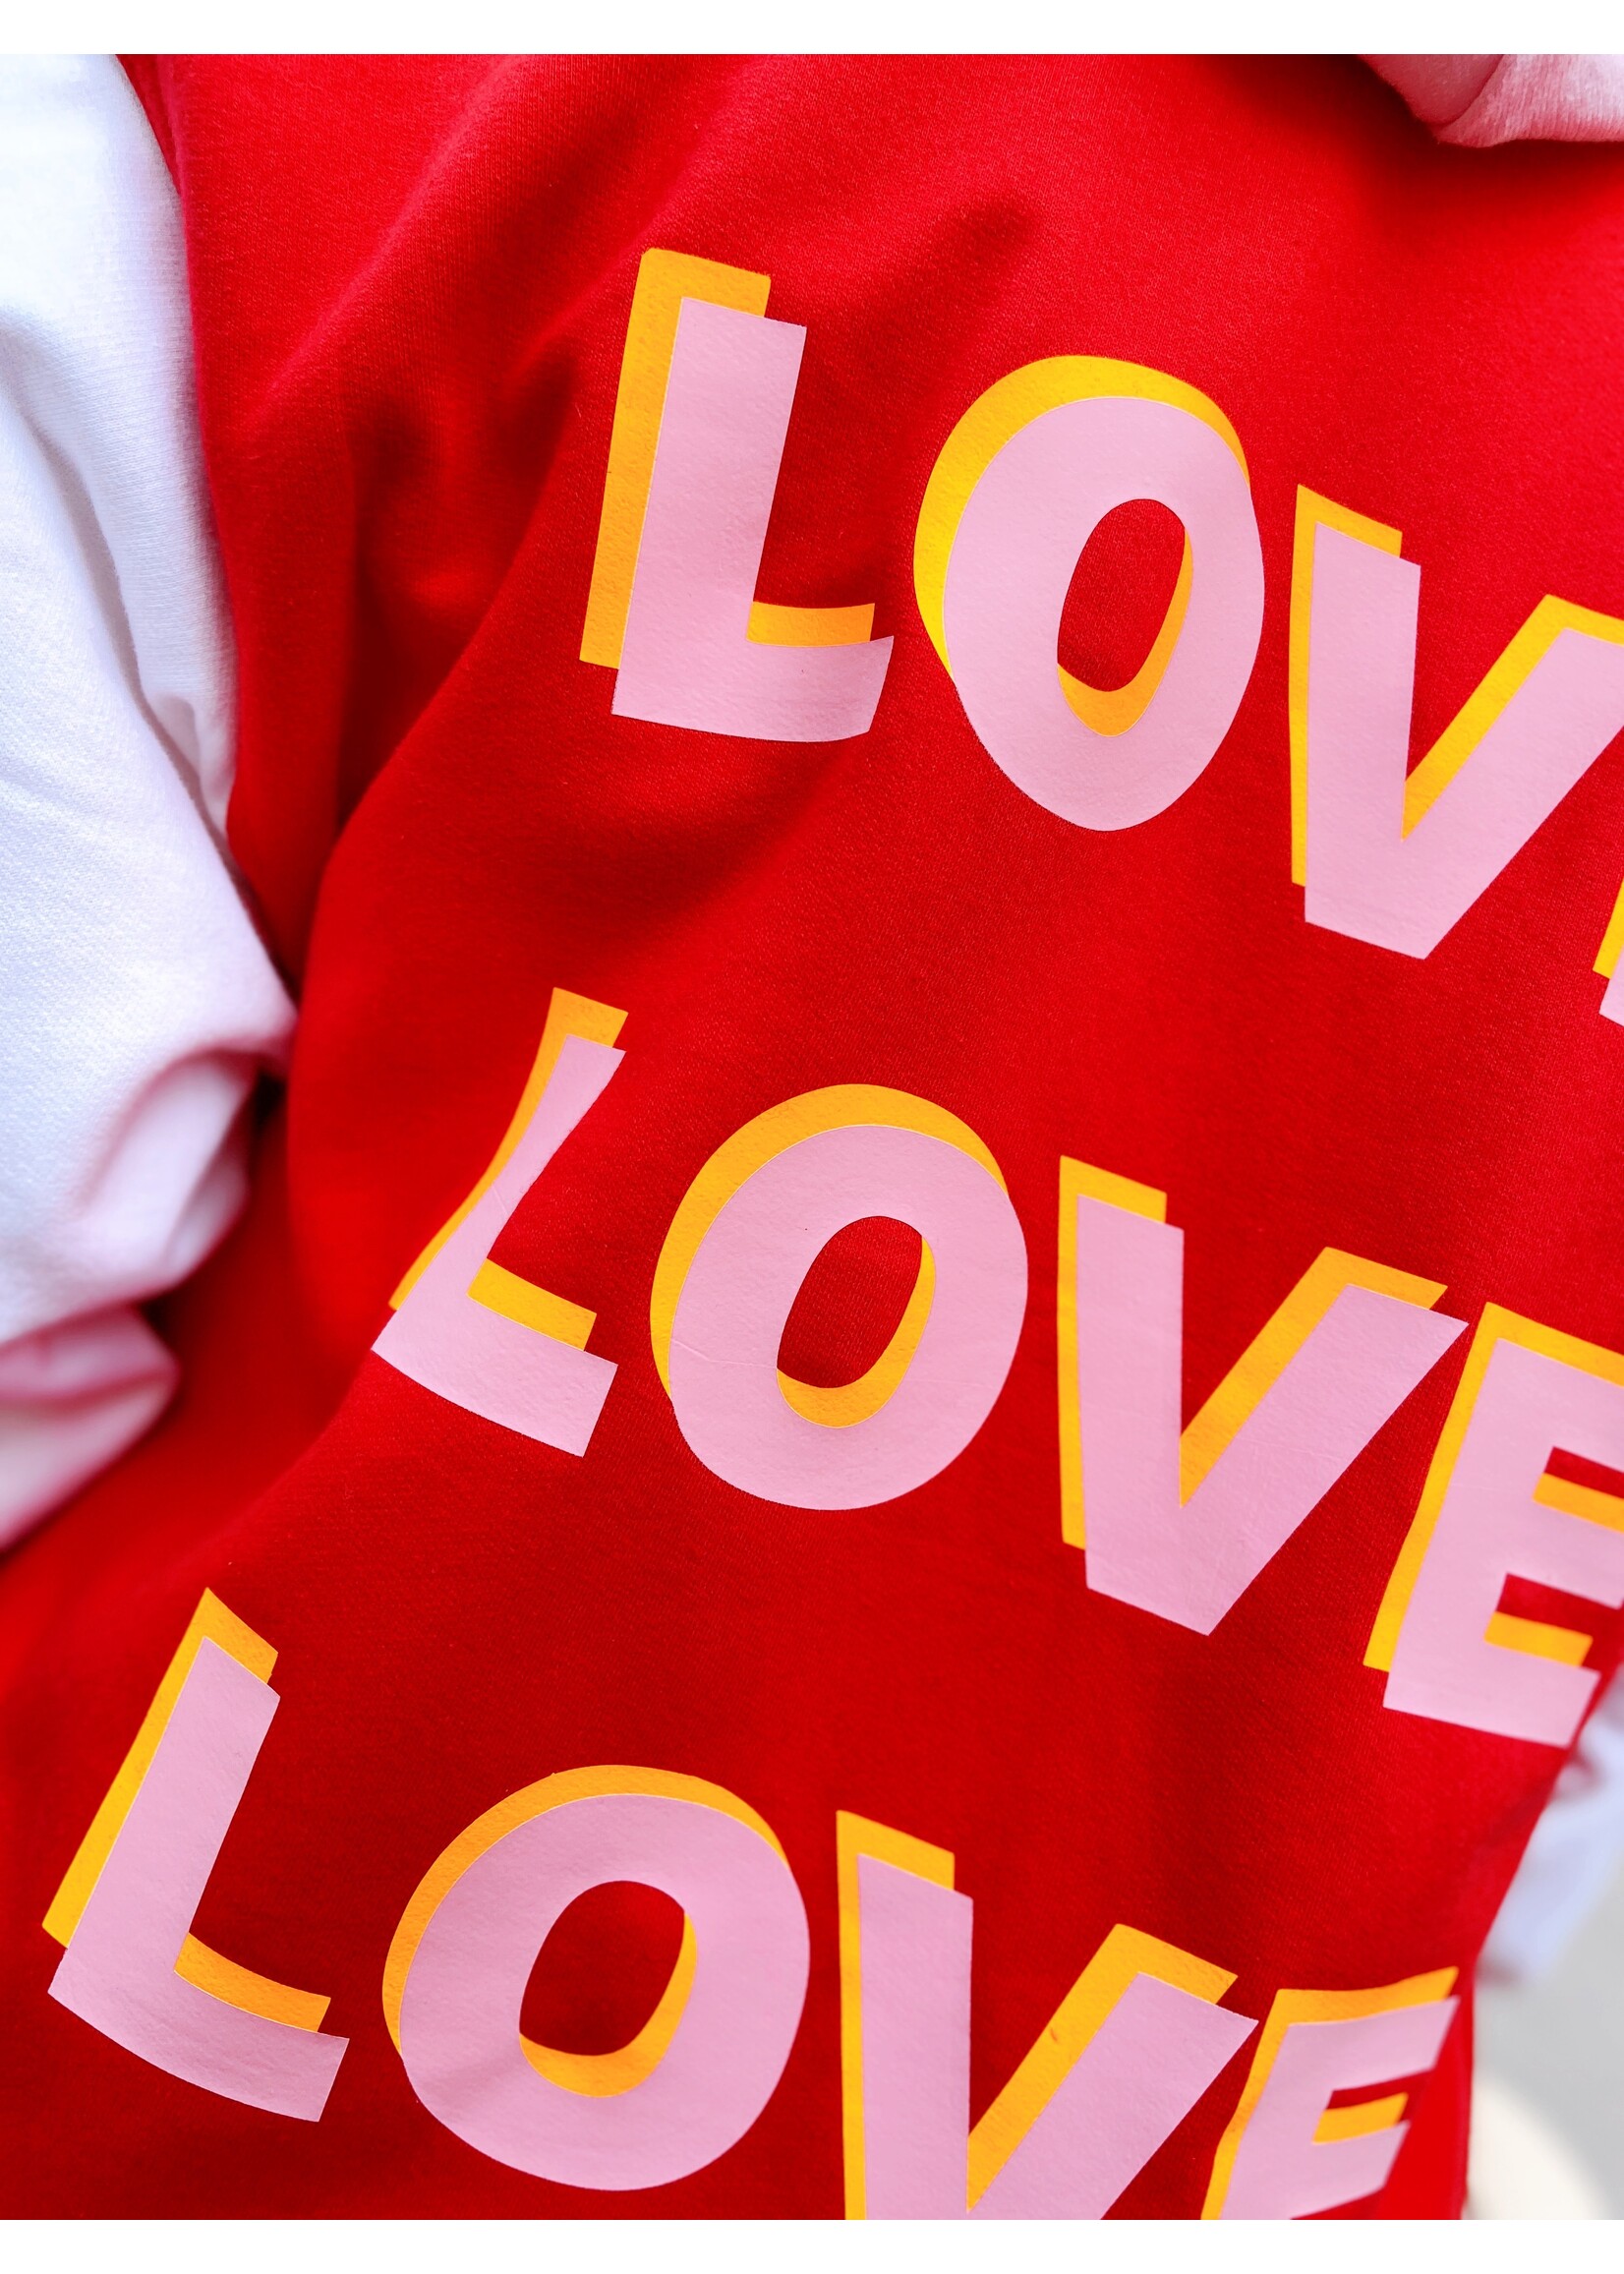 YOU ARE SPECIAL "Love Love Love" Red Baseball Jacket